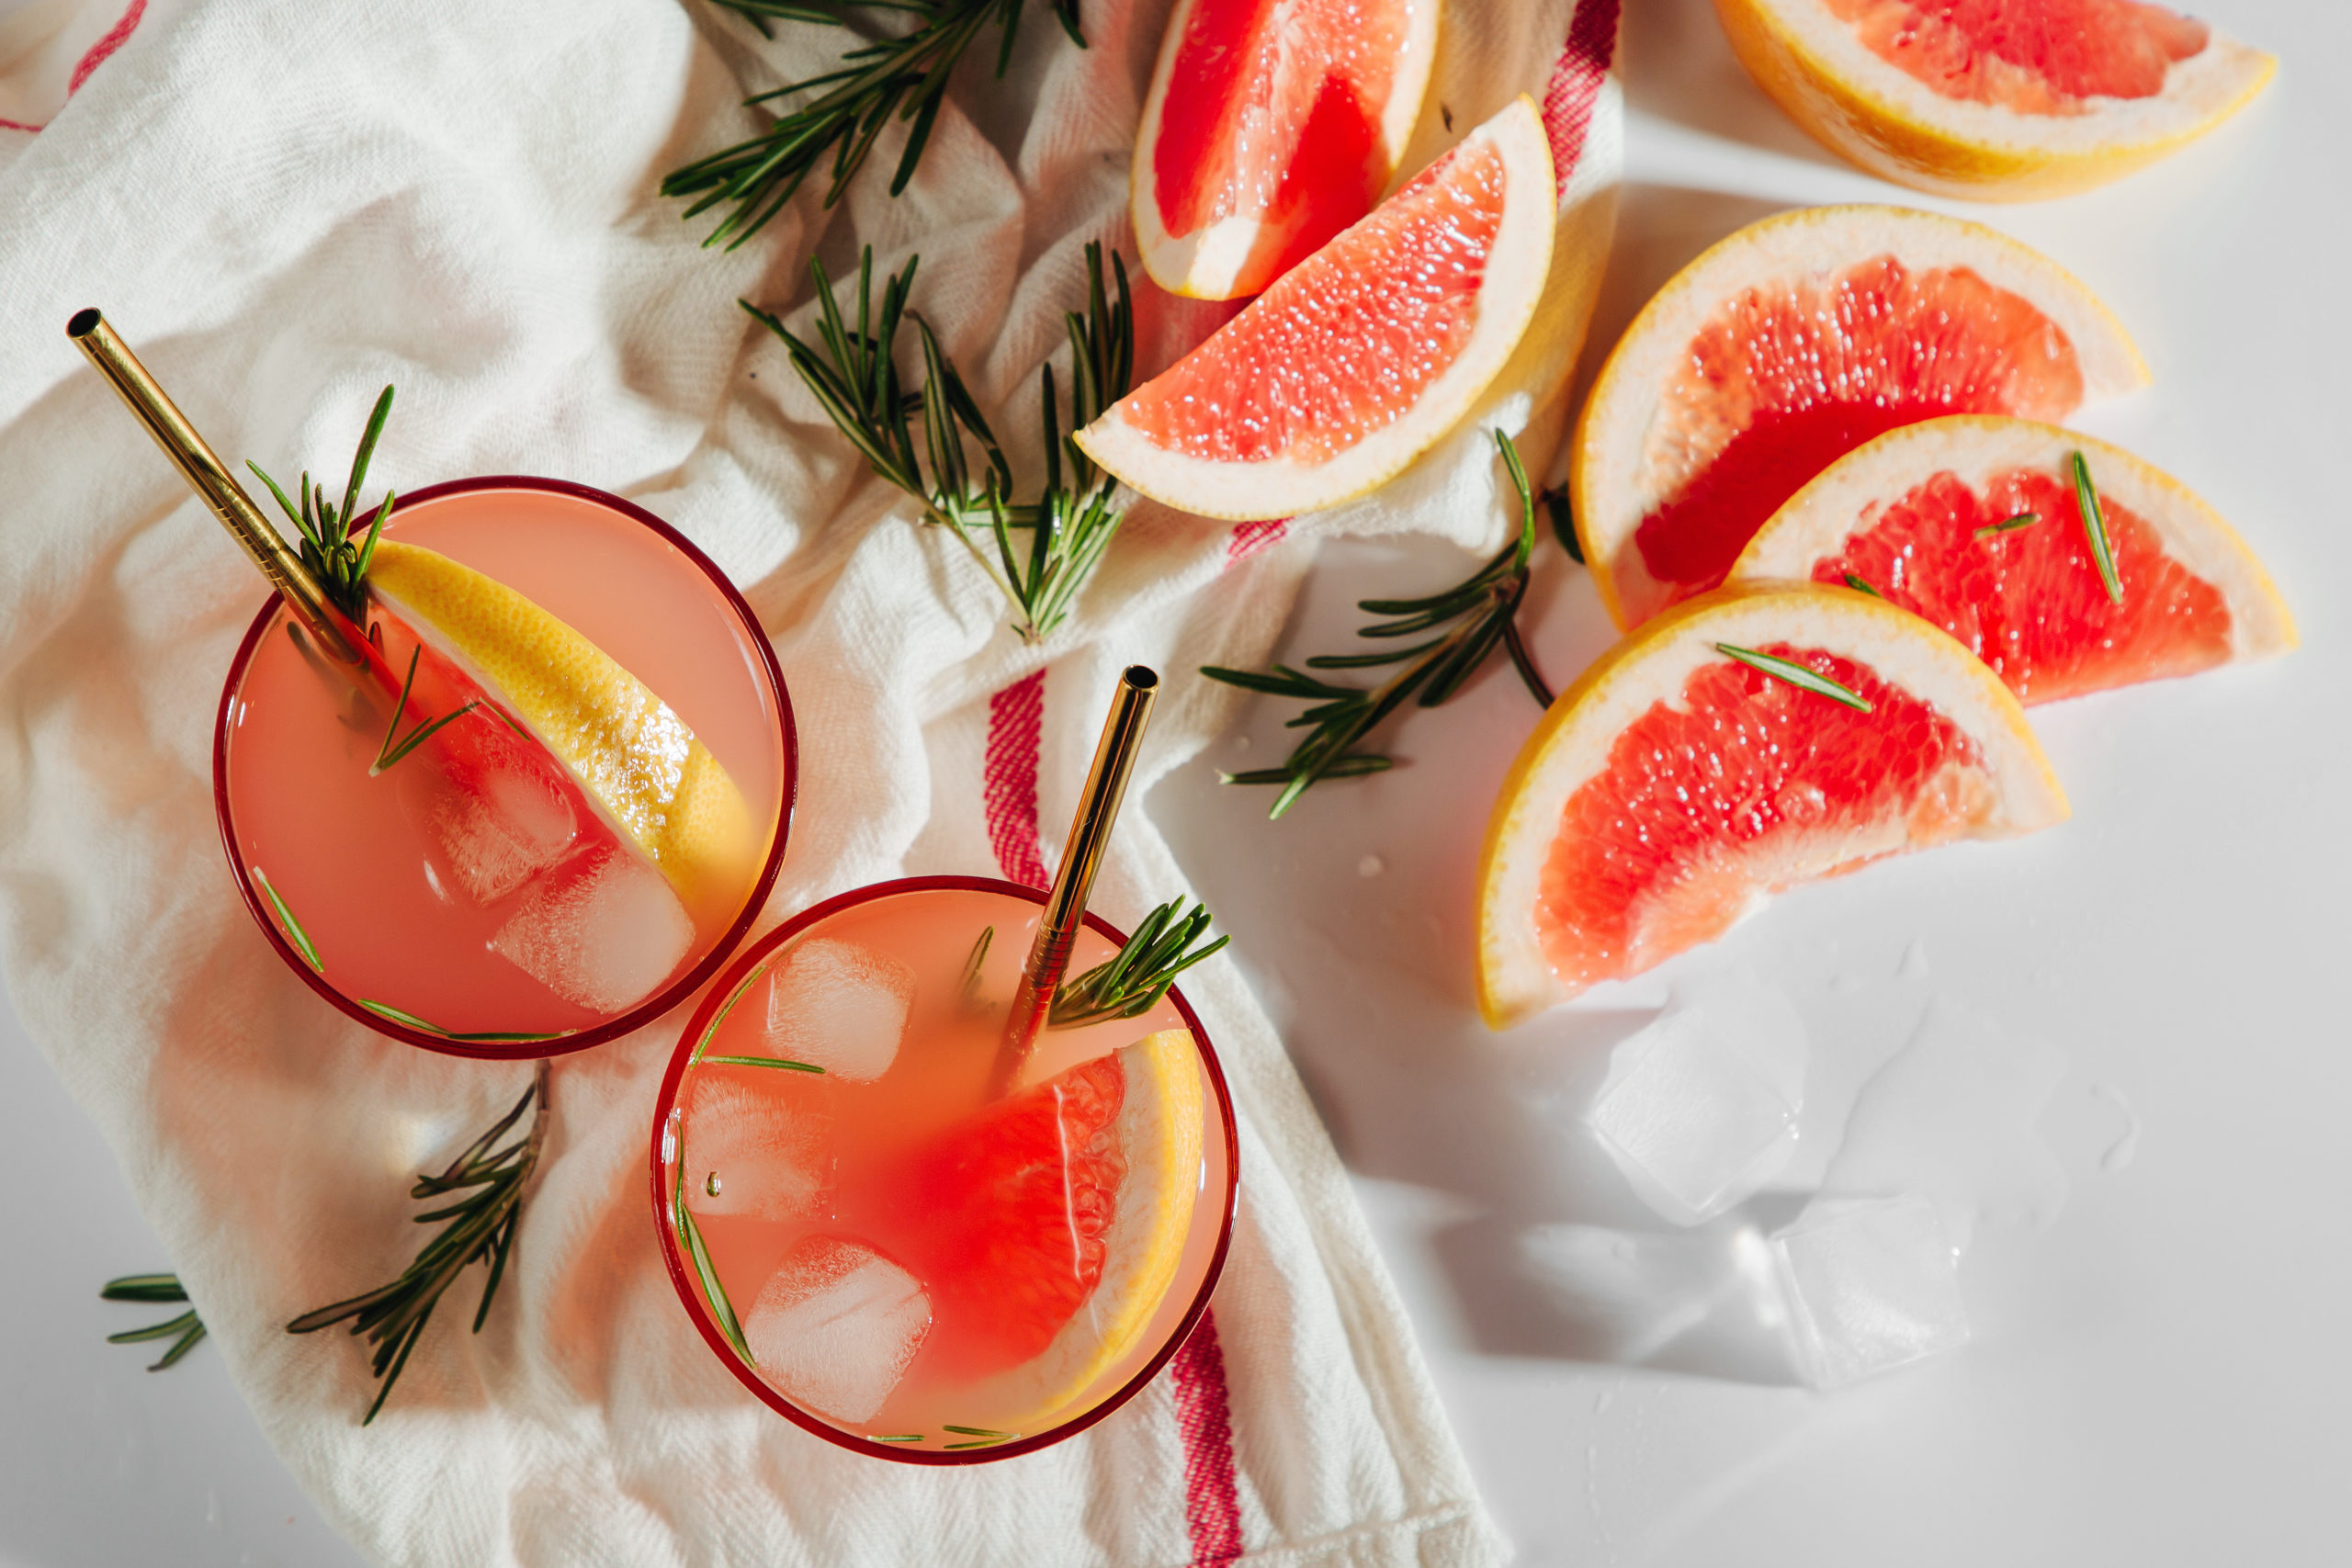 Homemade Cocktail making. Grapefruit and Rosemary cocktail.  Refreshing and non-alcoholic drink perfect for spring or summer.